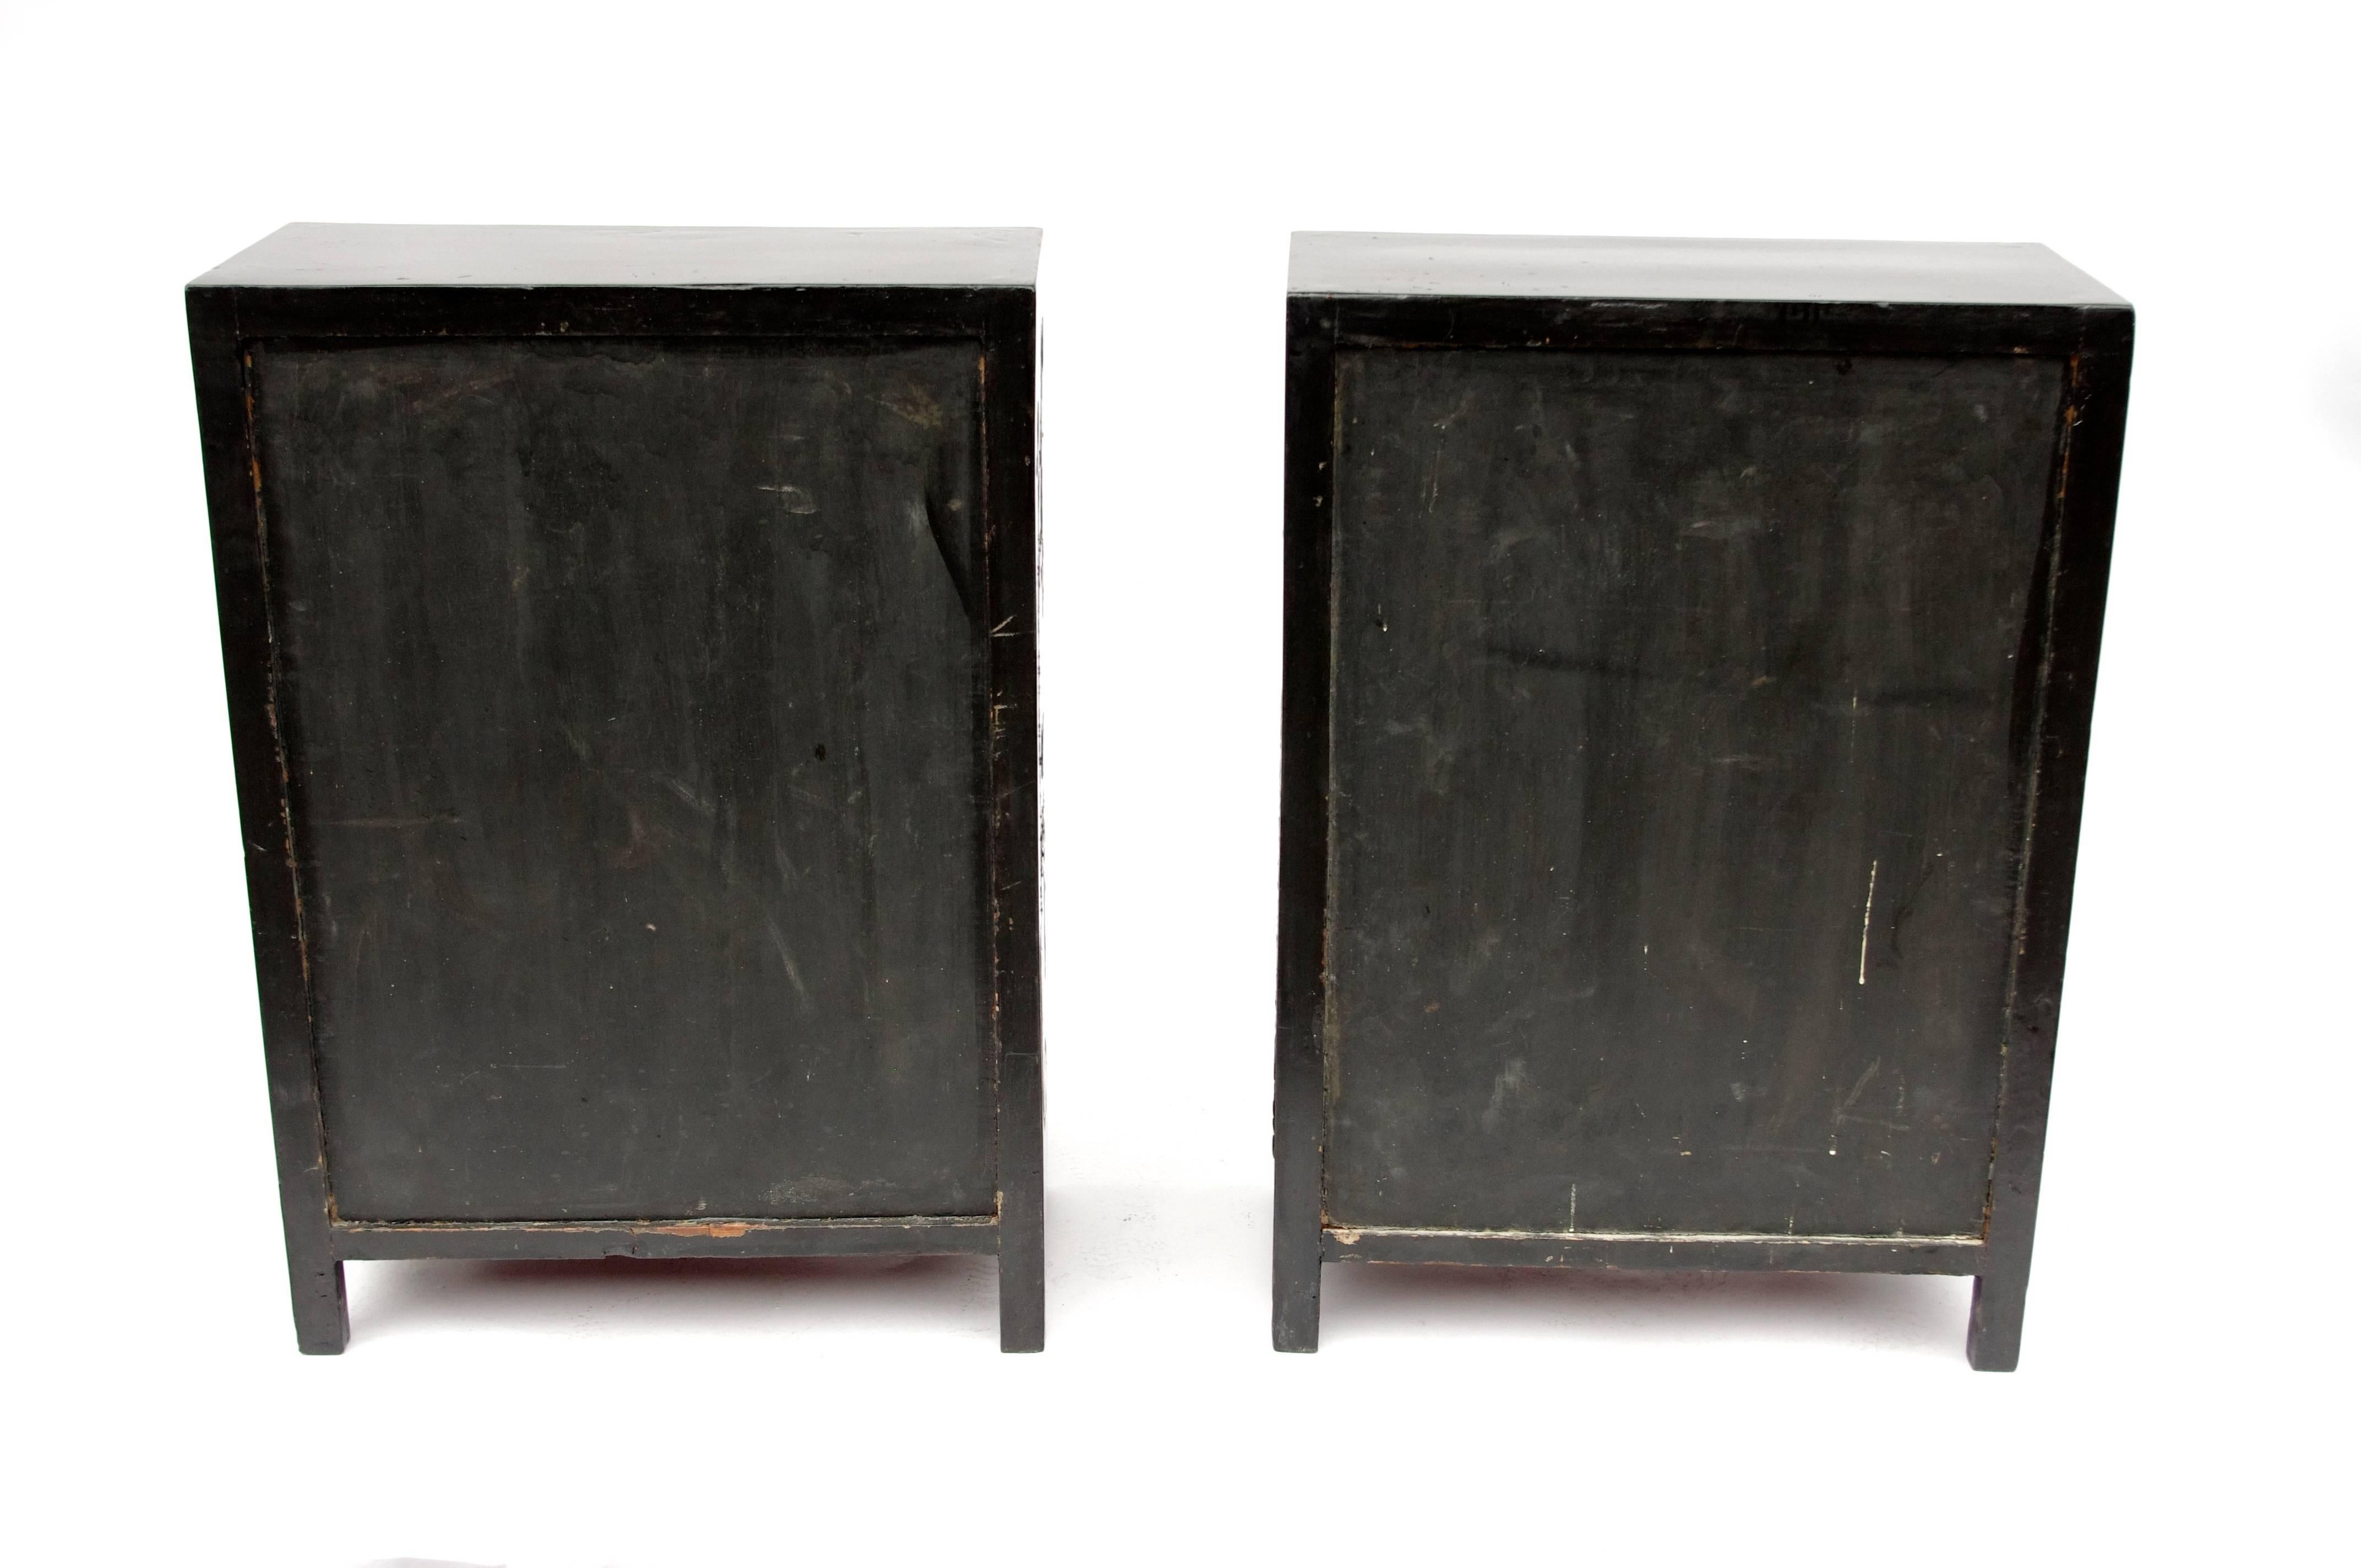 Agate Pair of Lacquered Nightstands with Hard Stones Inlays, circa 1900